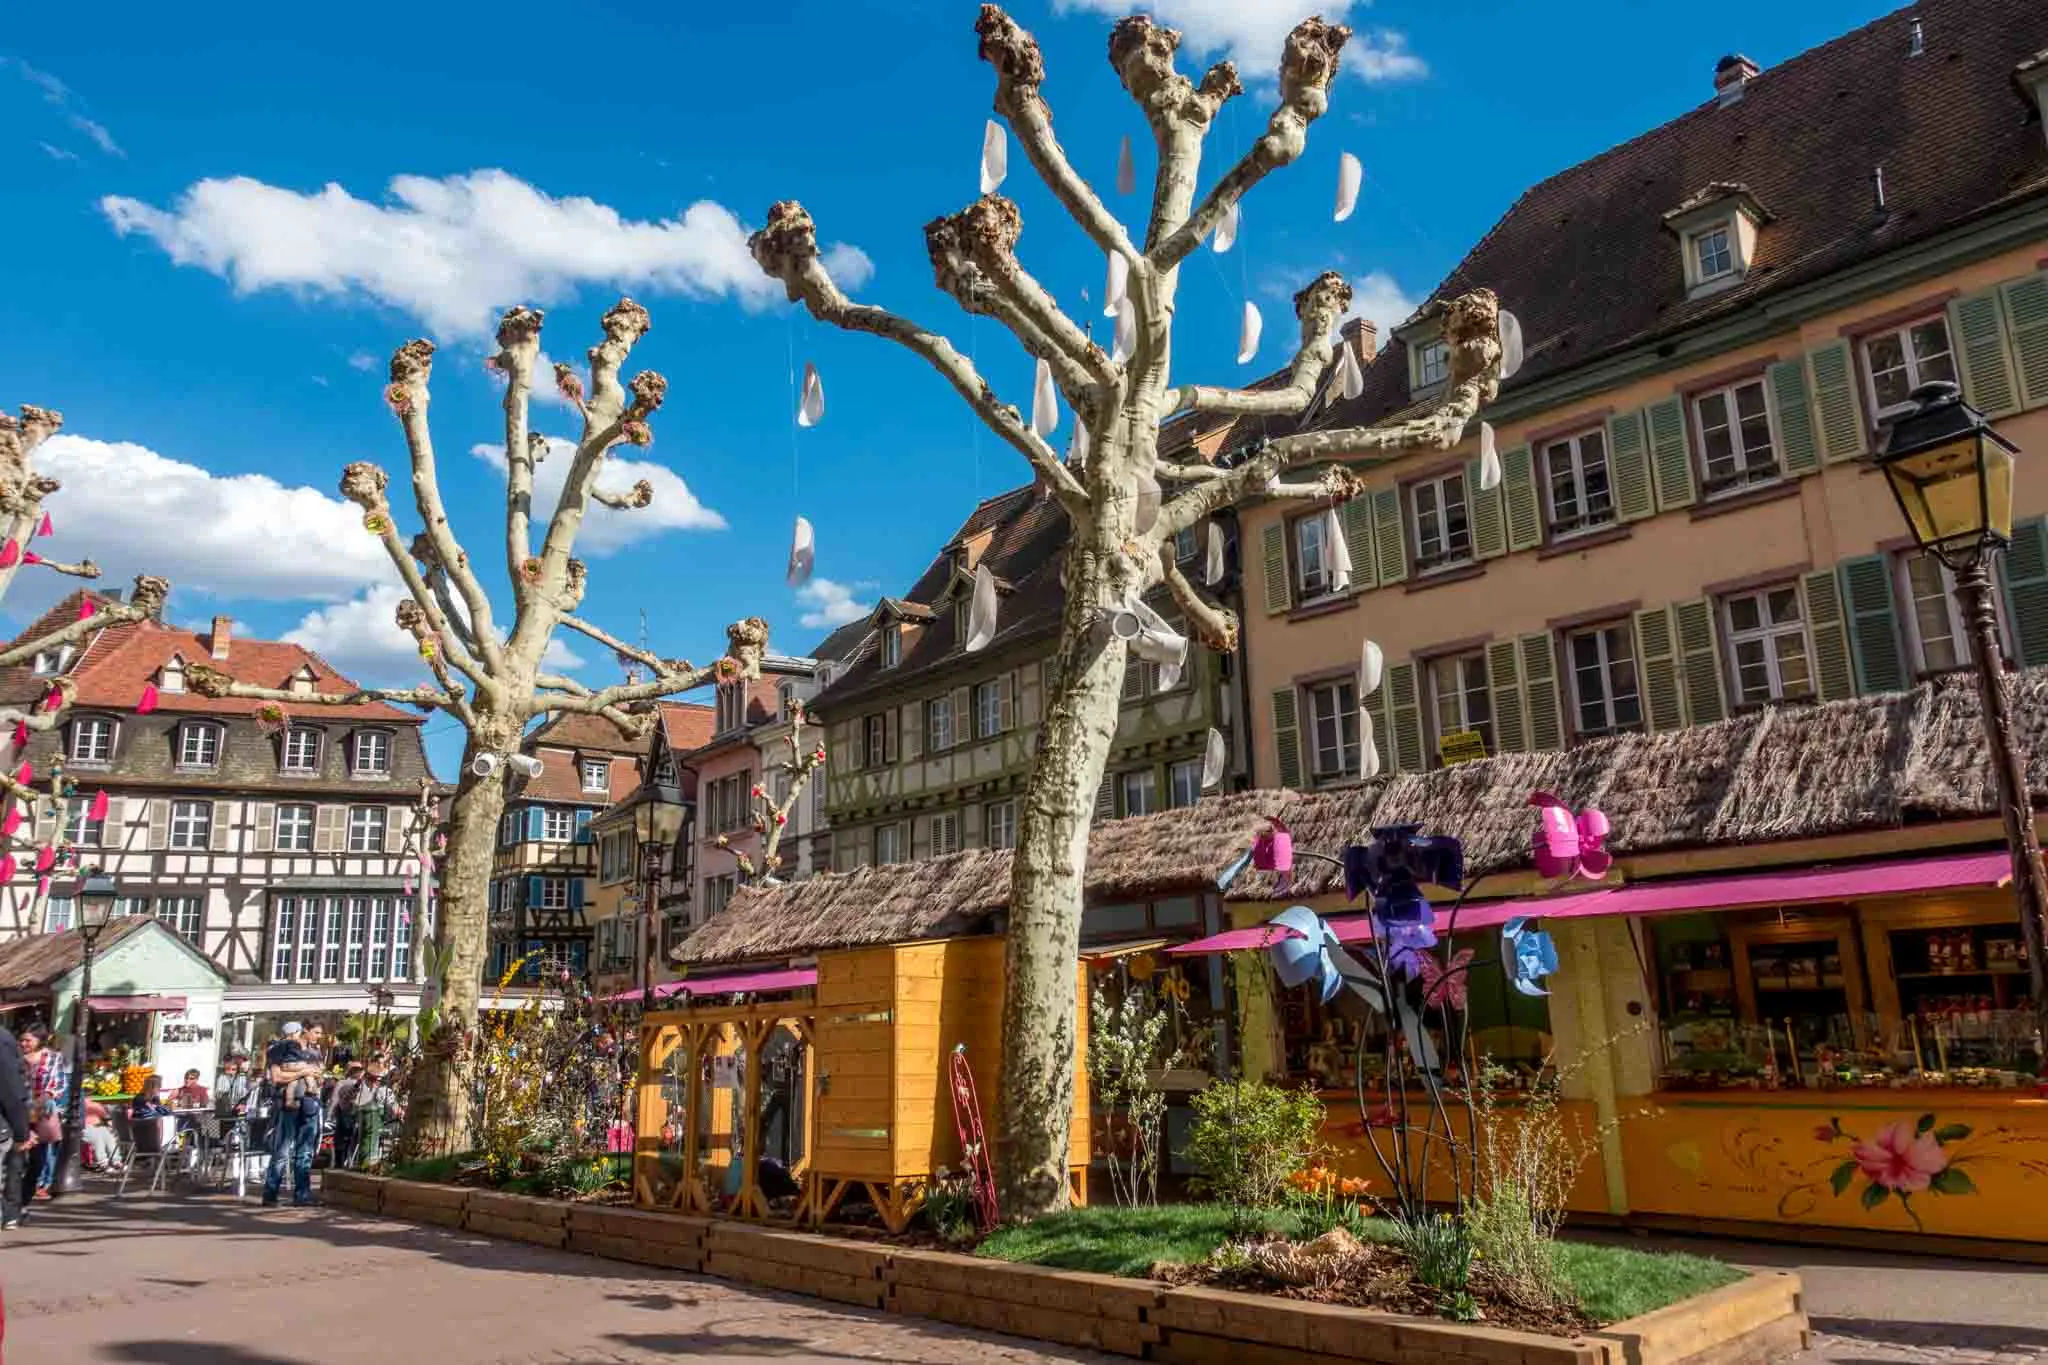 Easter market and spring decorations